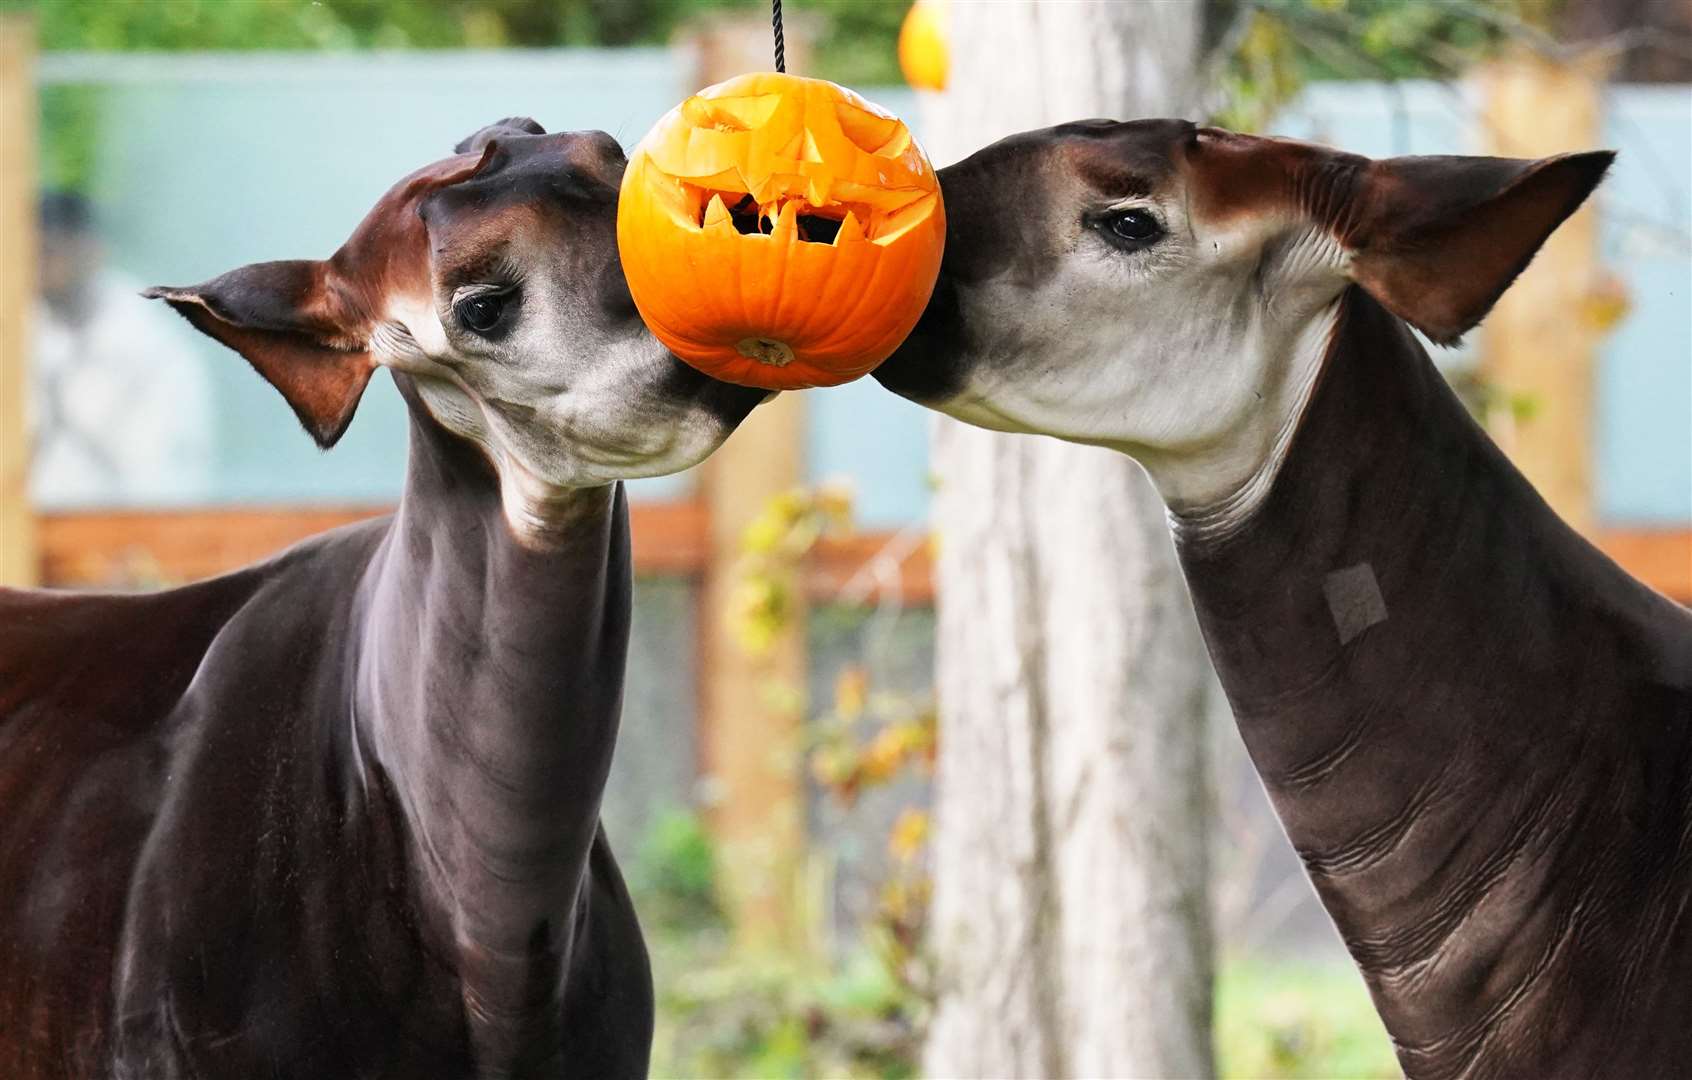 Okapis, Oni and Ede, wrapped their bewitching black tongues around the pumpkins (Jonathan Brady/PA)